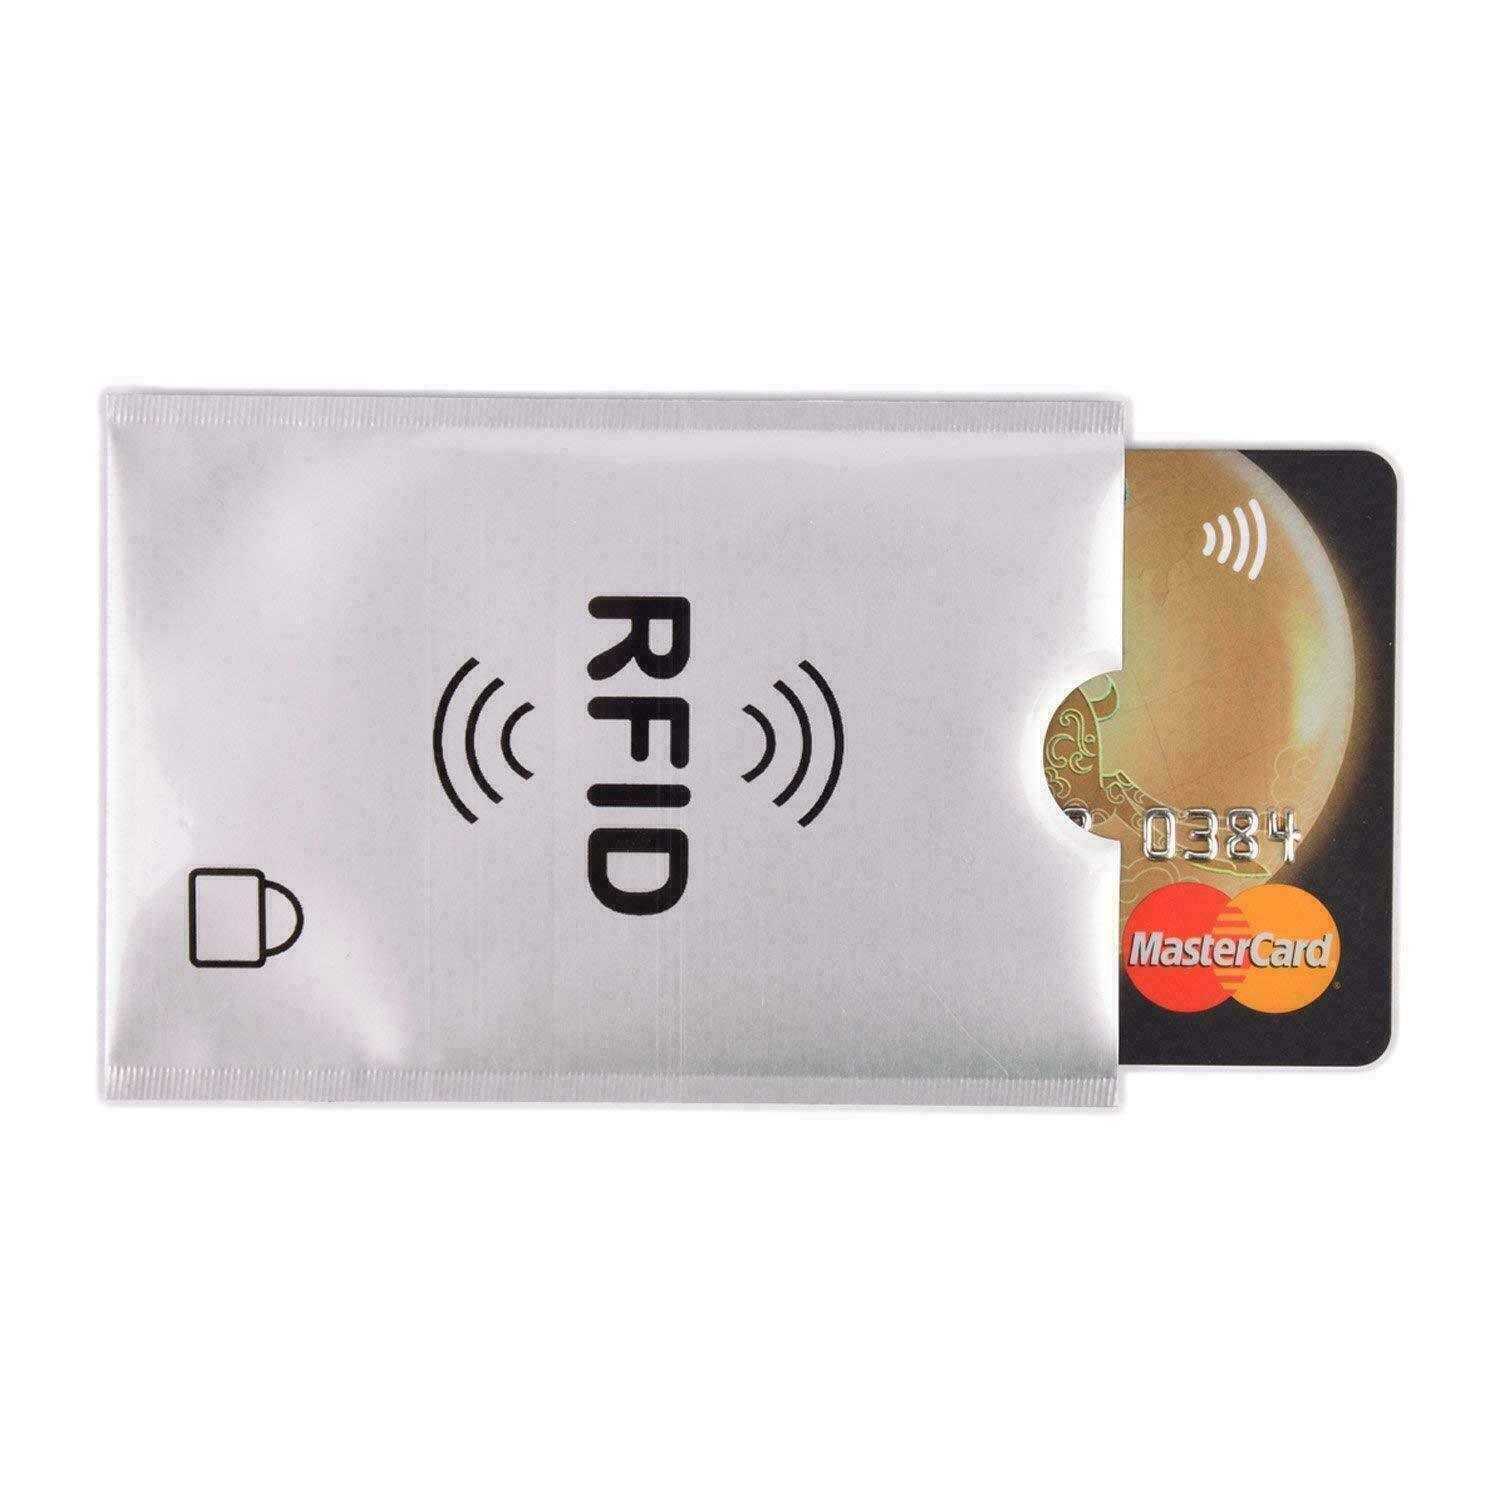 Lot of 8 RFID Blocking Credit Card Sleeve Theft Protector Chip Shield